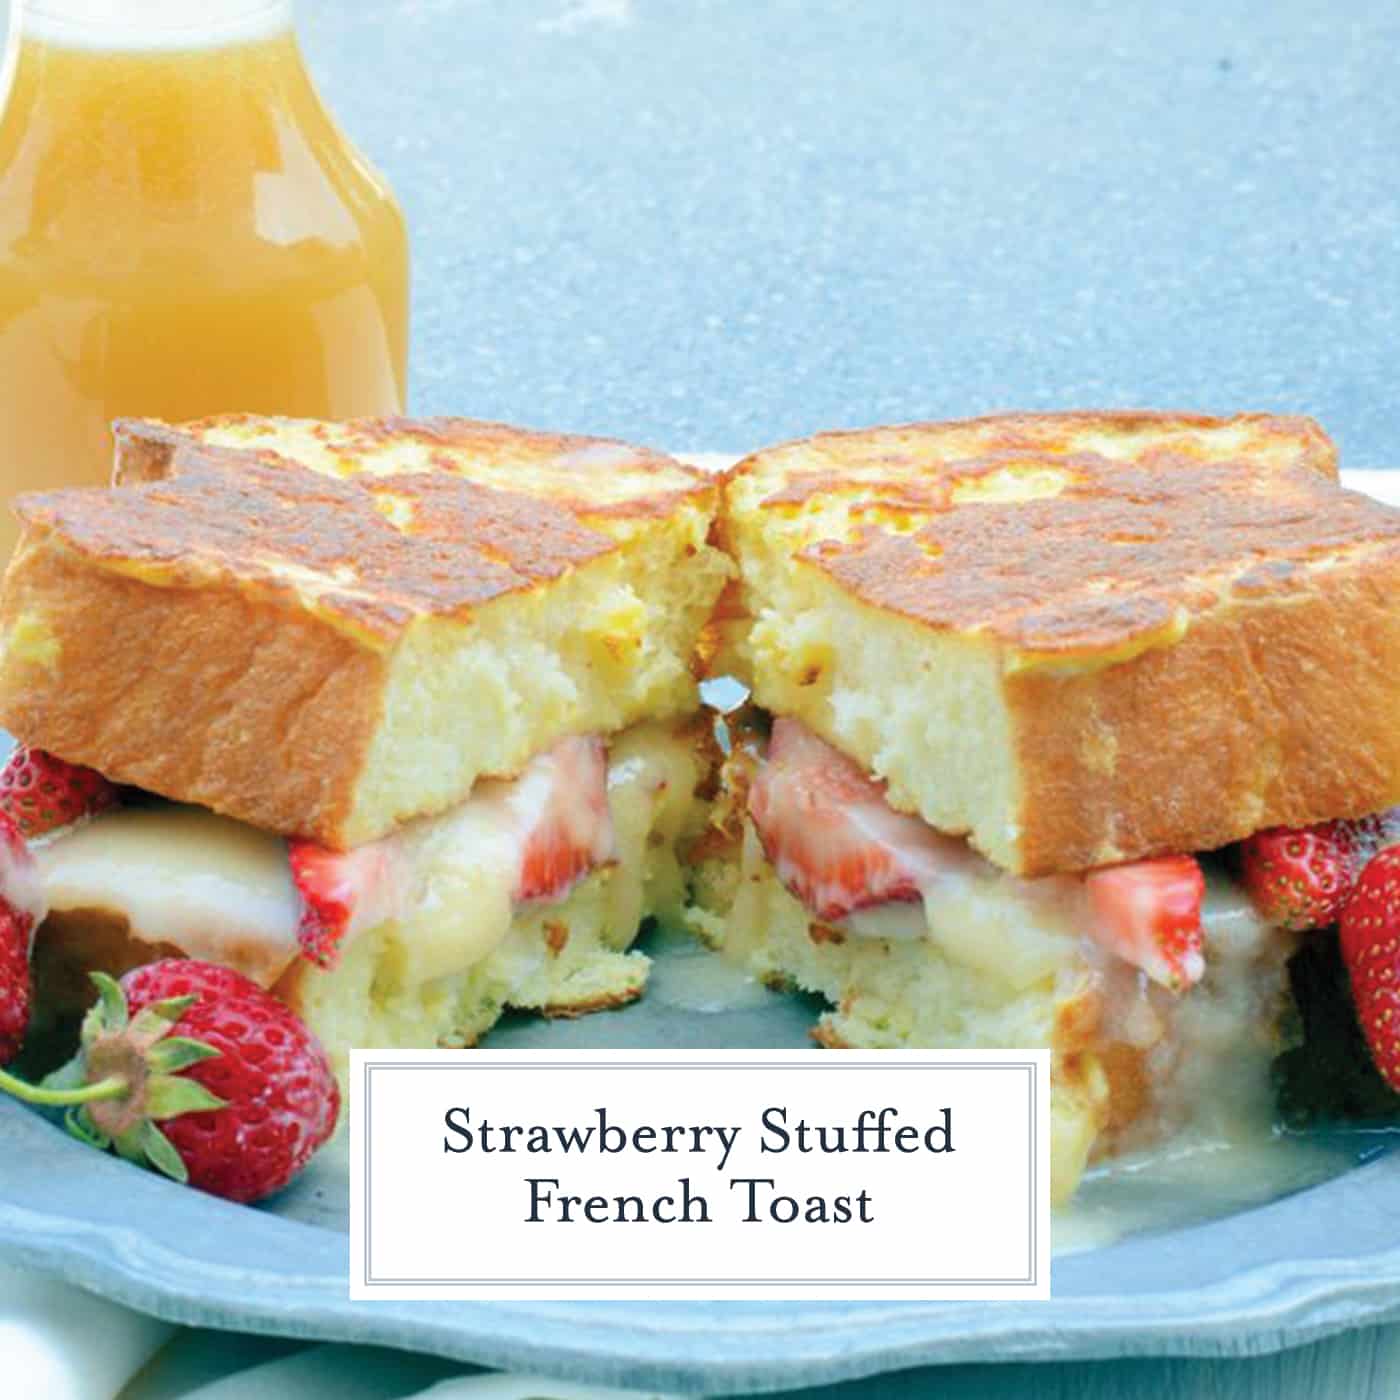 Strawberry Stuffed French Toast is made with mascarpone, Dutch honey syrup, fresh strawberries, and buttery brioche, pound cake, or angel food, for a perfectly delicious dish to enjoy for breakfast! #stuffedfrenchtoast www.savoryexperiments.com